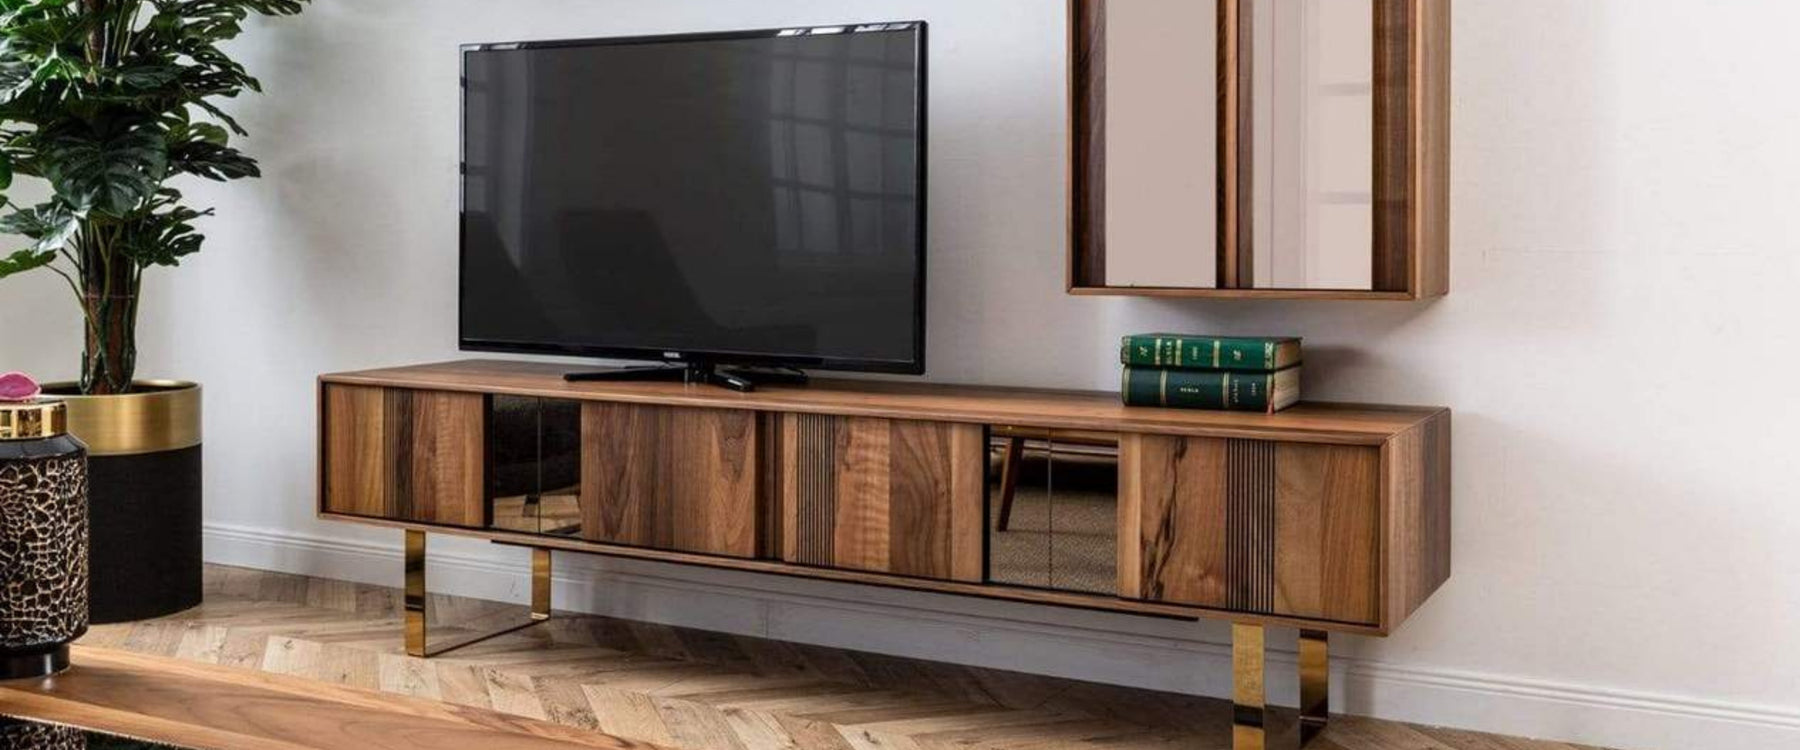 Things to Consider When Choosing a Television Unit